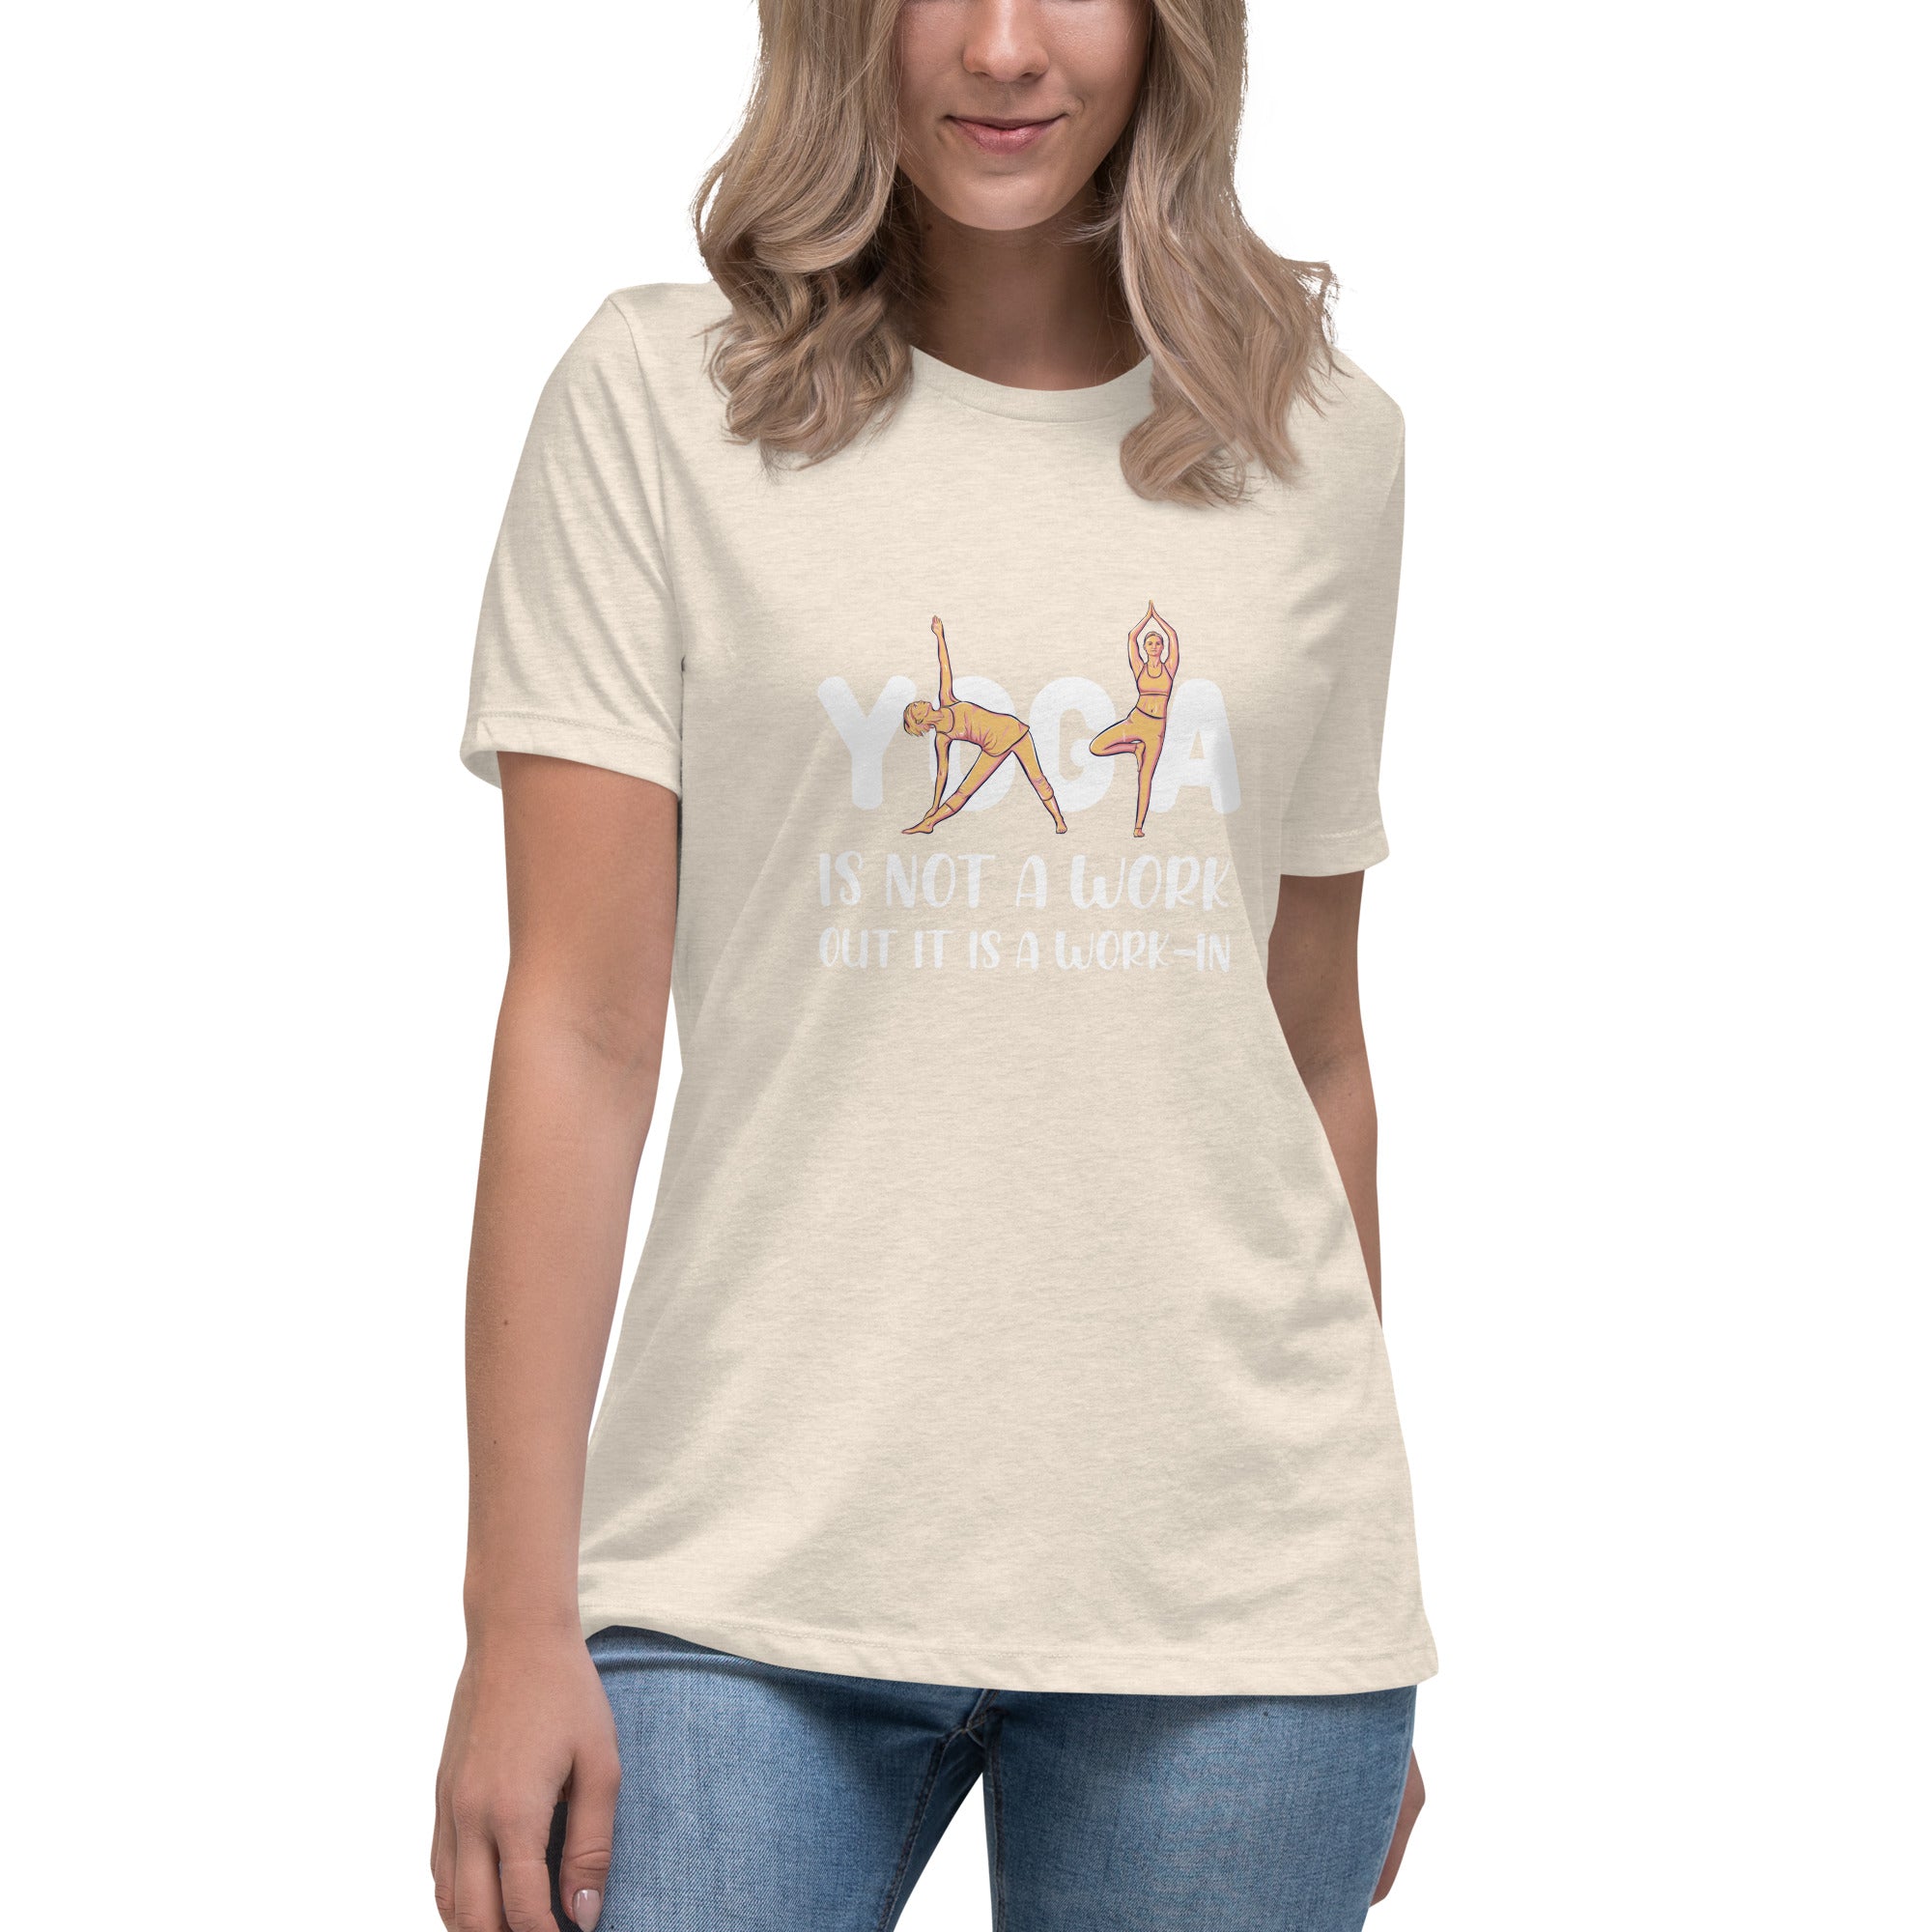 Not a Work Out - Work In - Women's Relaxed T-Shirt